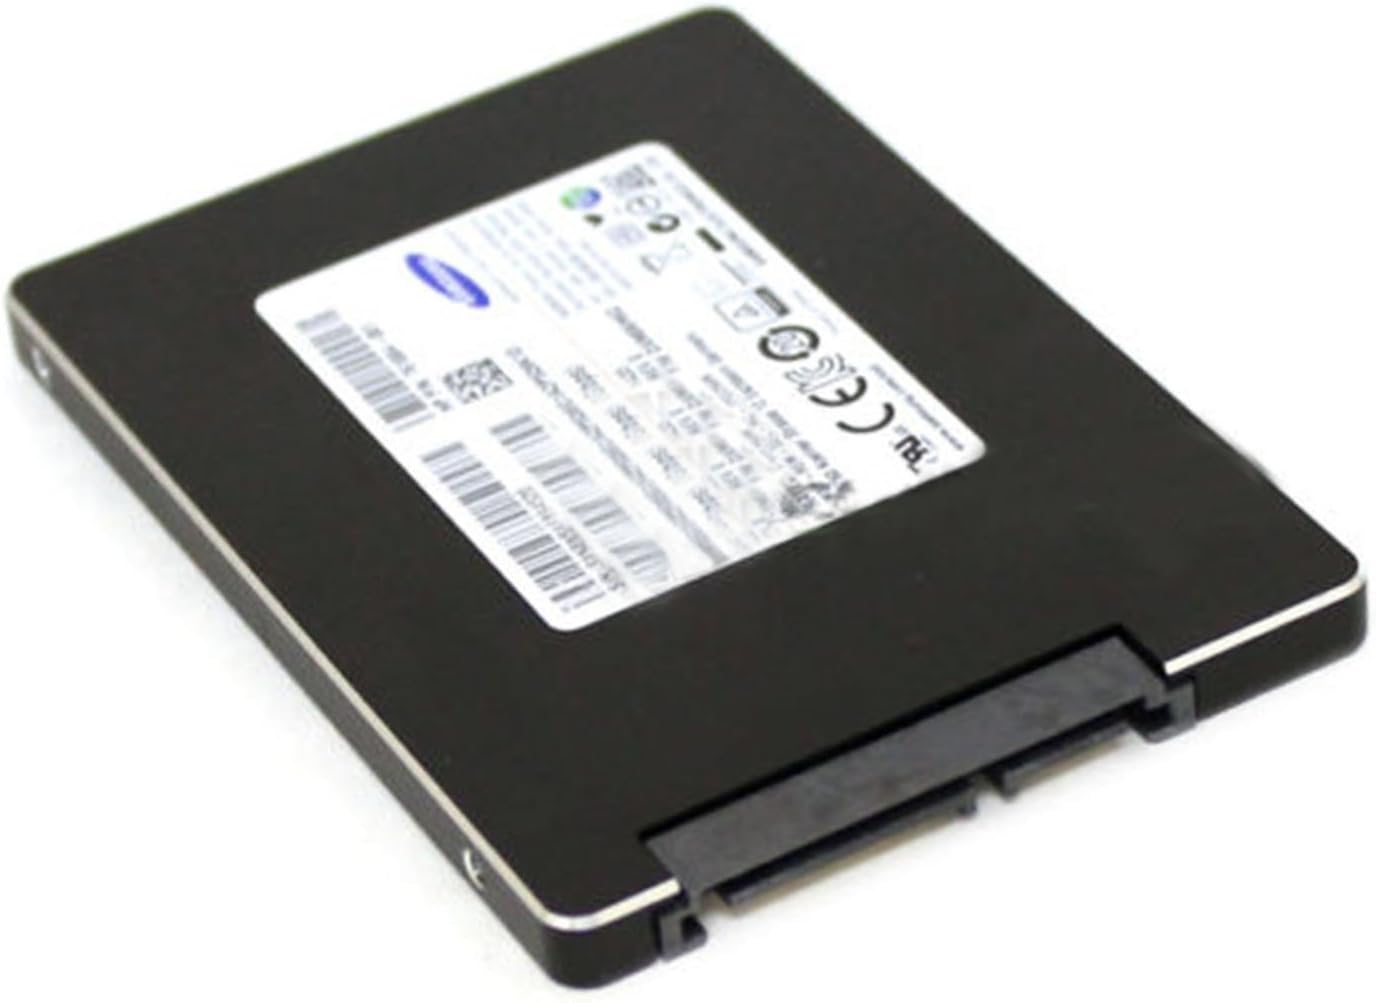 New A+ Replacement for HP 761885-001 Laptop Samsung SSD HDD SM841N 2.5 7mm 128GB MZ-7PD128M MZ7PD128HCFV-000H7 SATA 3.0 6.0Gb/s Hard Disk Solid State Drive